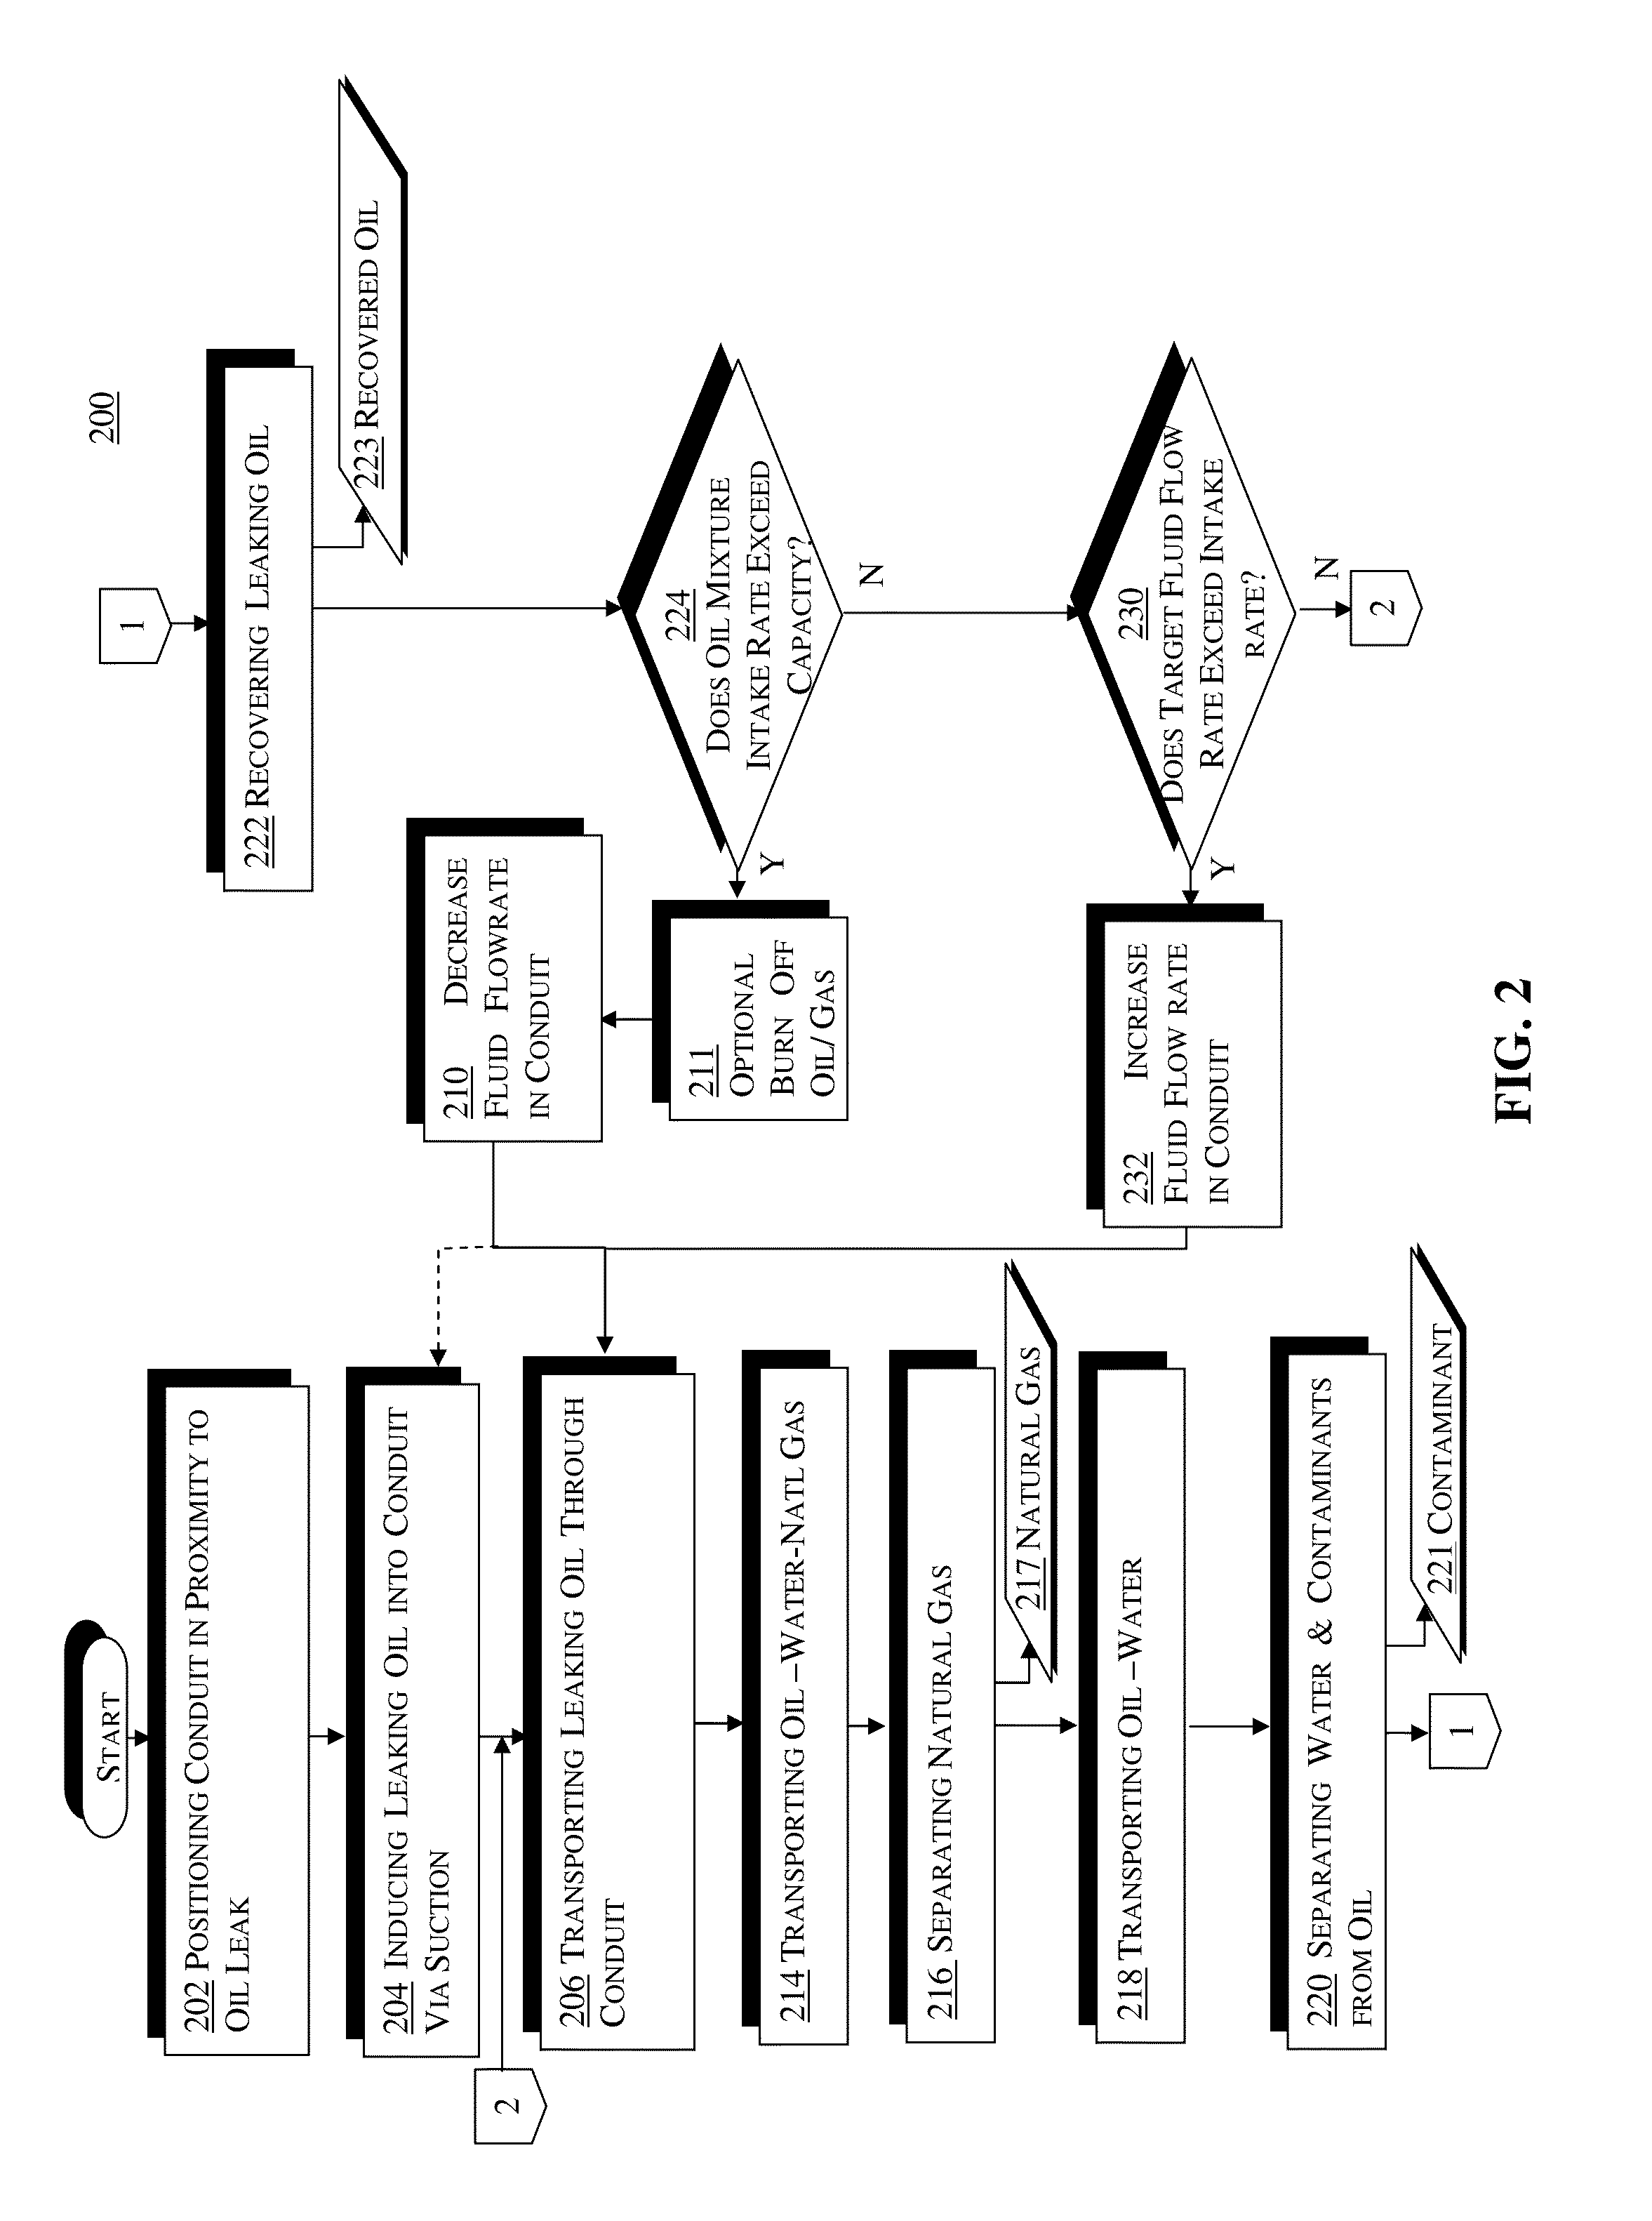 Method and device for underwater recovery of products or pollutants